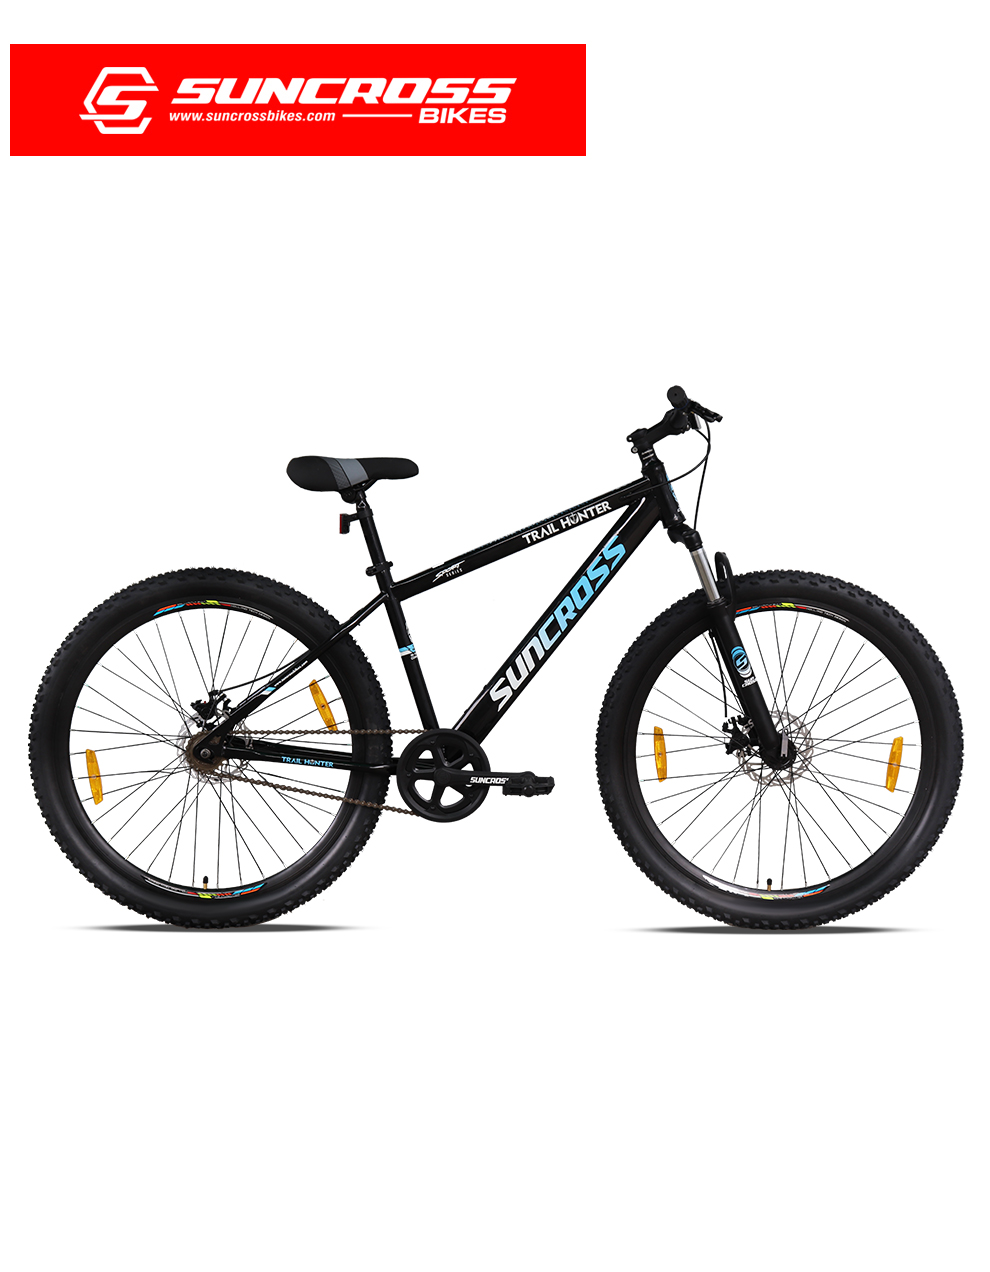 Suncross Brand Bicycles Shop Online E BIKE, MTB, ROAD, HYBRID Bikes, FAT and KIDS Cycles in India.